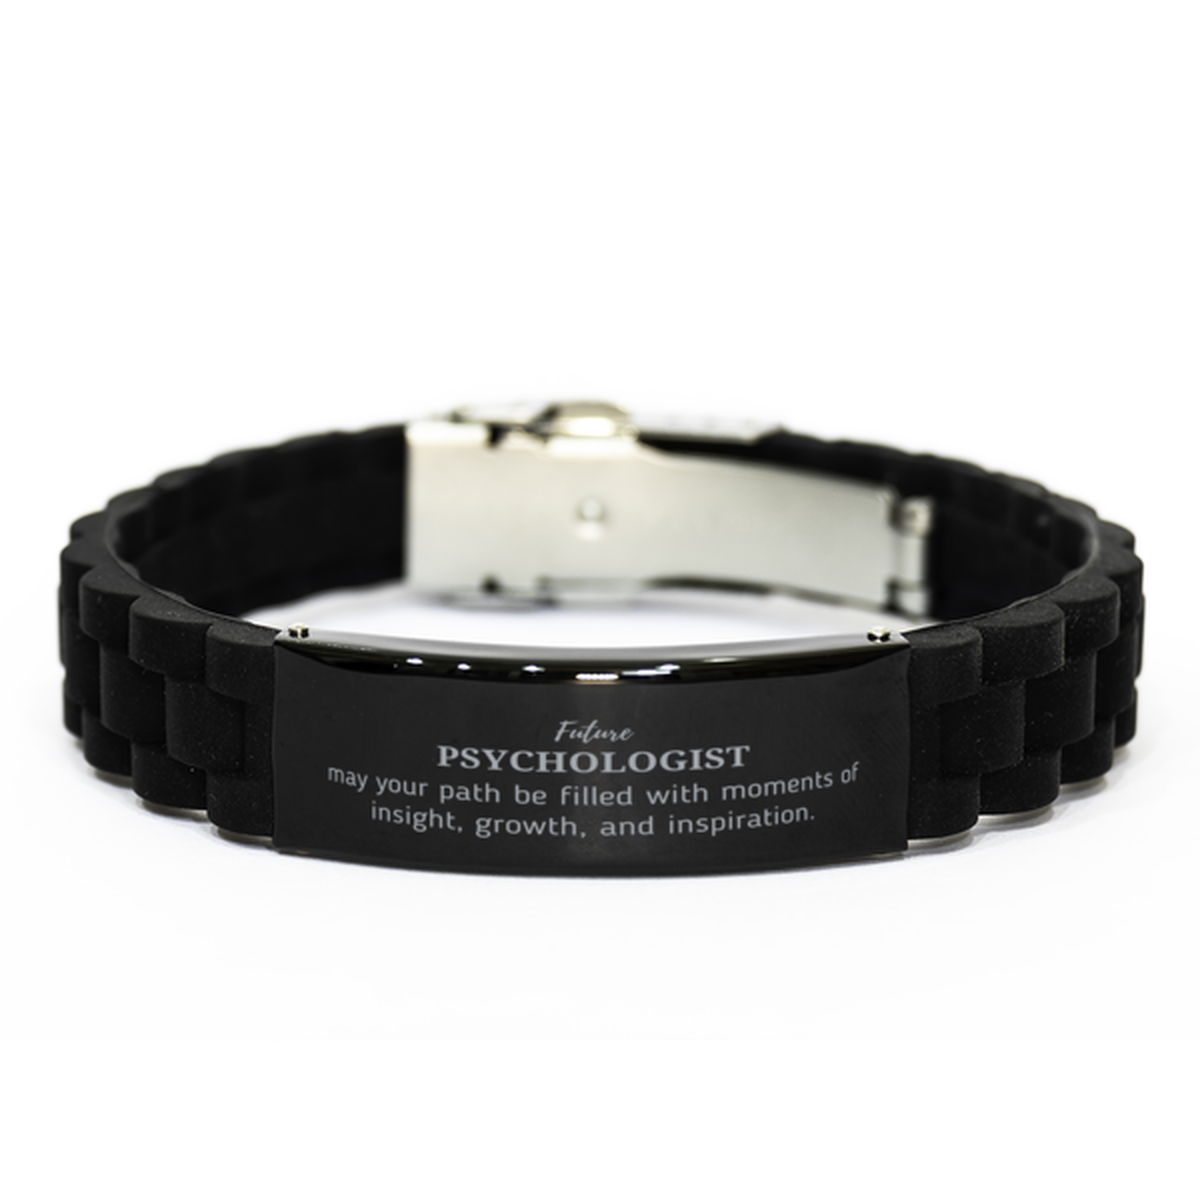 Future Psychologist Gifts, May your path be filled with moments of insight, Graduation Gifts for New Psychologist, Christmas Unique Black Glidelock Clasp Bracelet For Men, Women, Friends